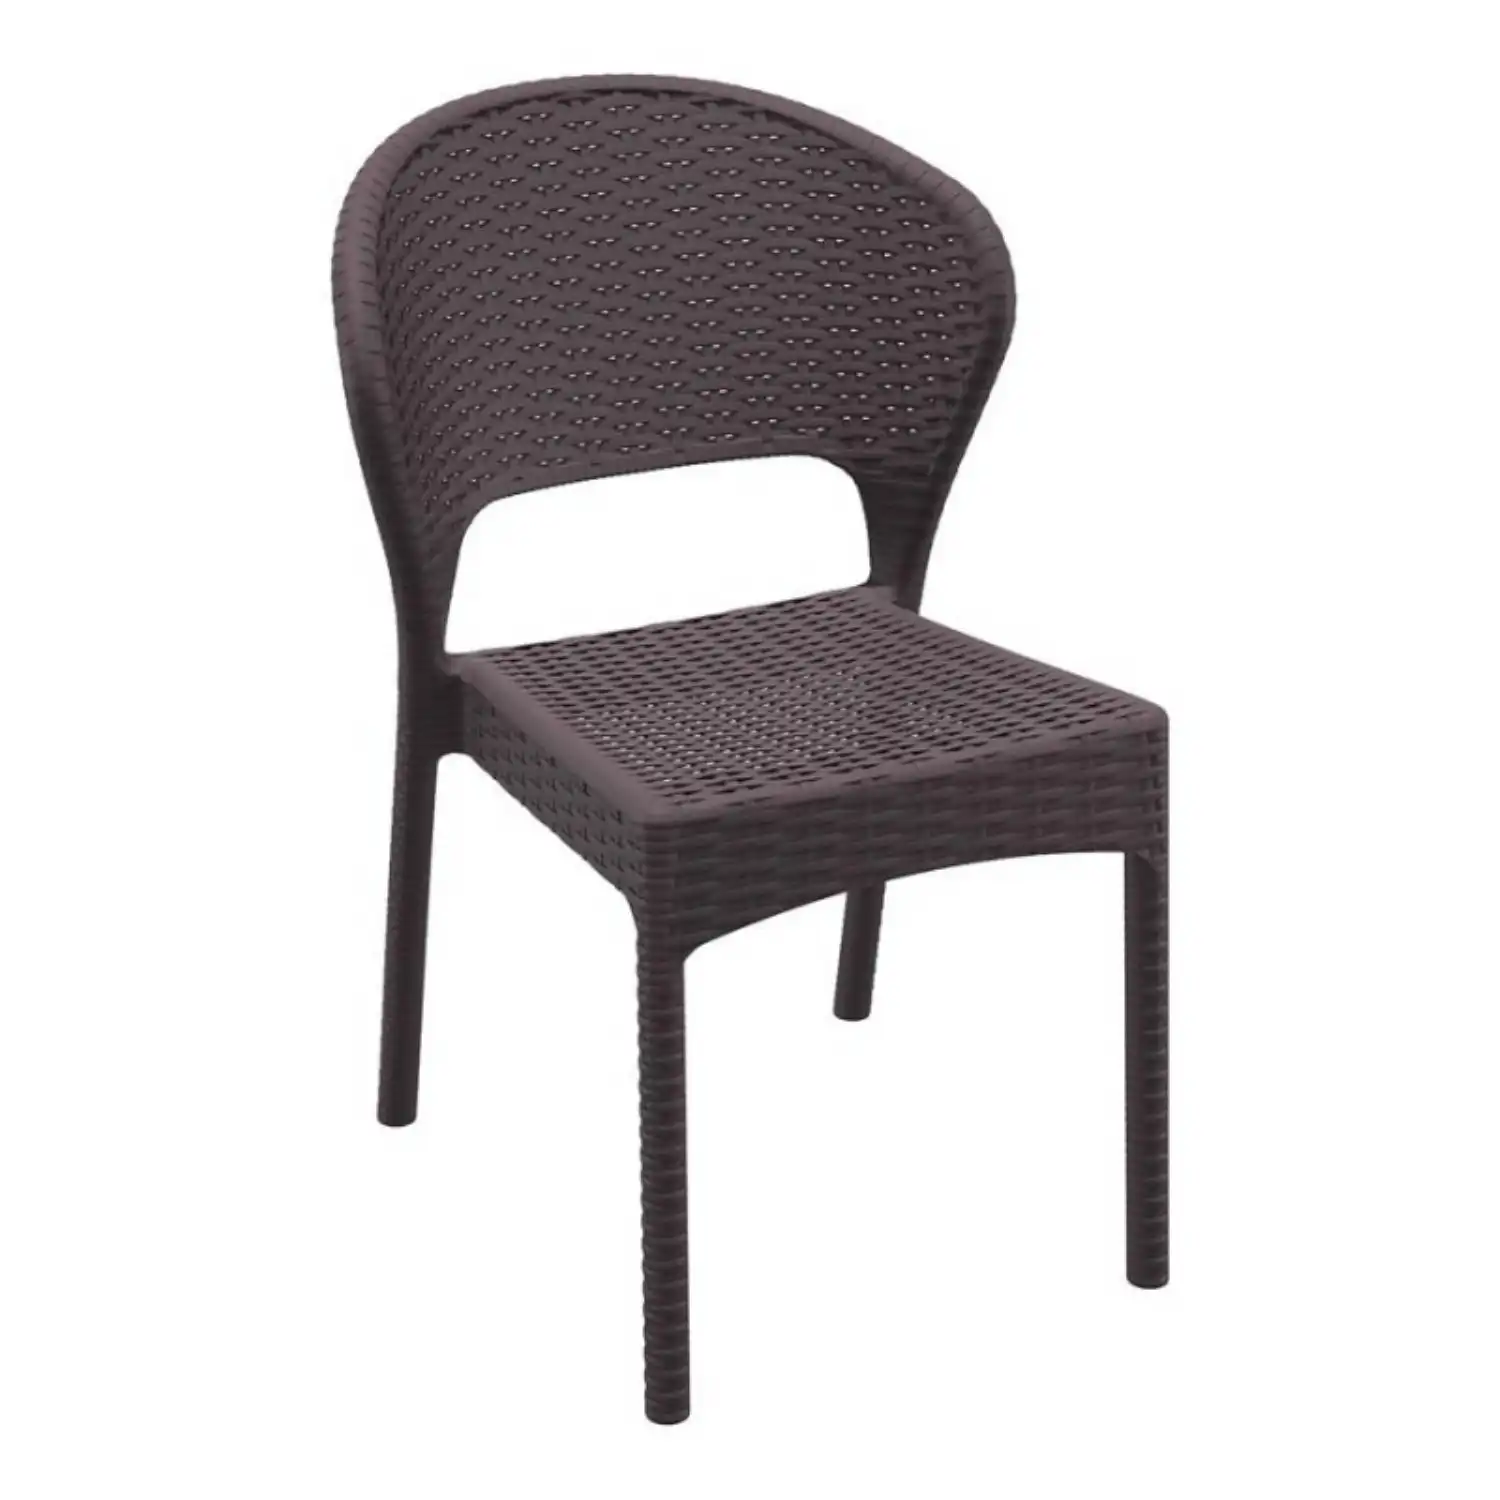 Brown Rattan Stacking Side Chair Outdoor